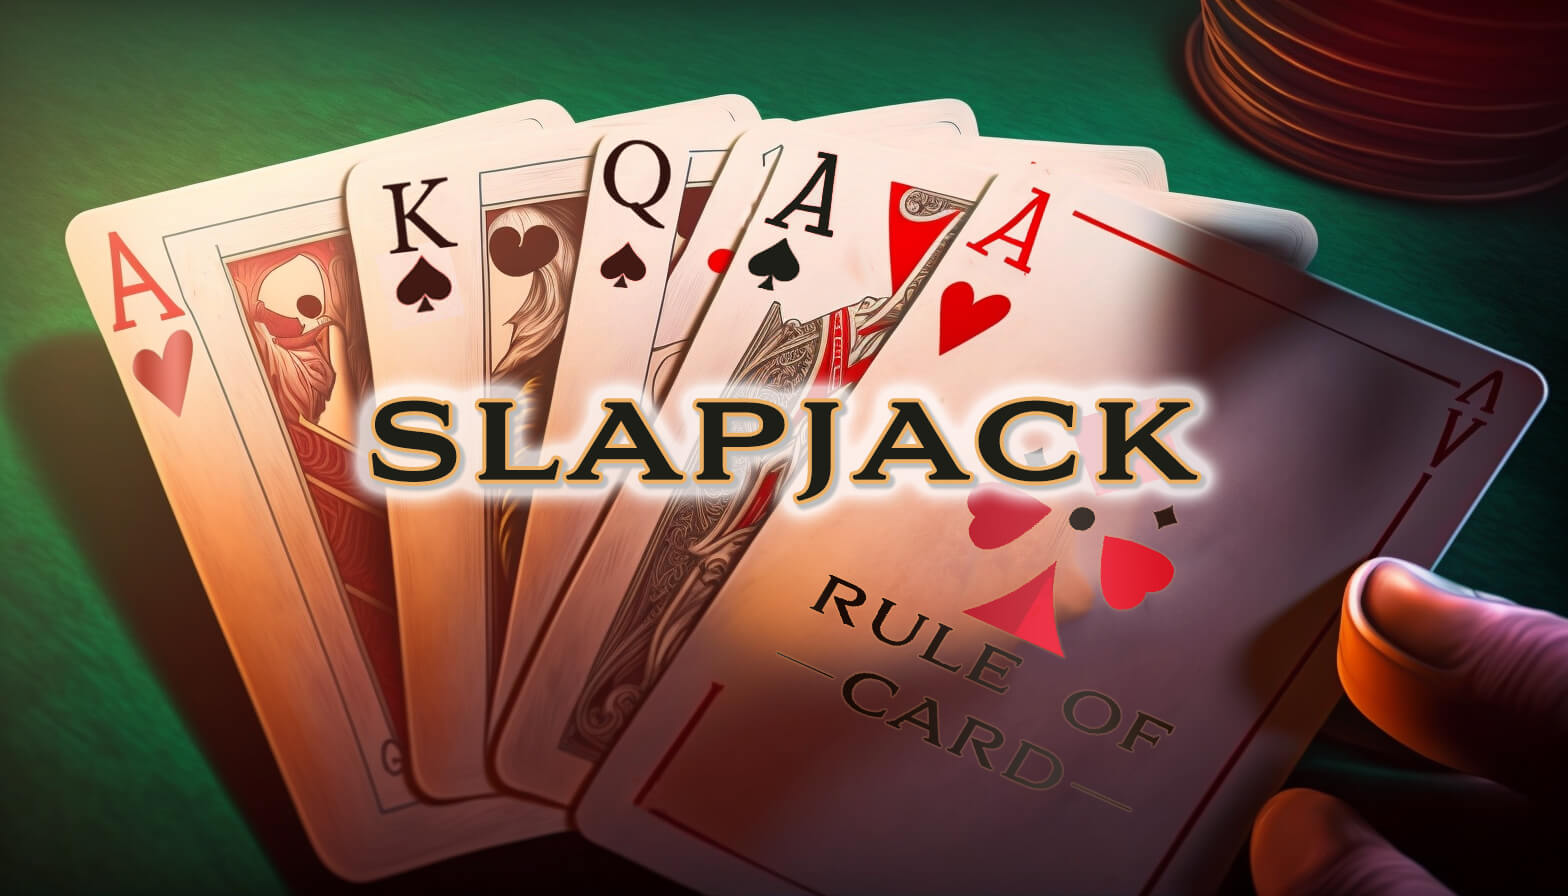 Playing the card game Slapjack